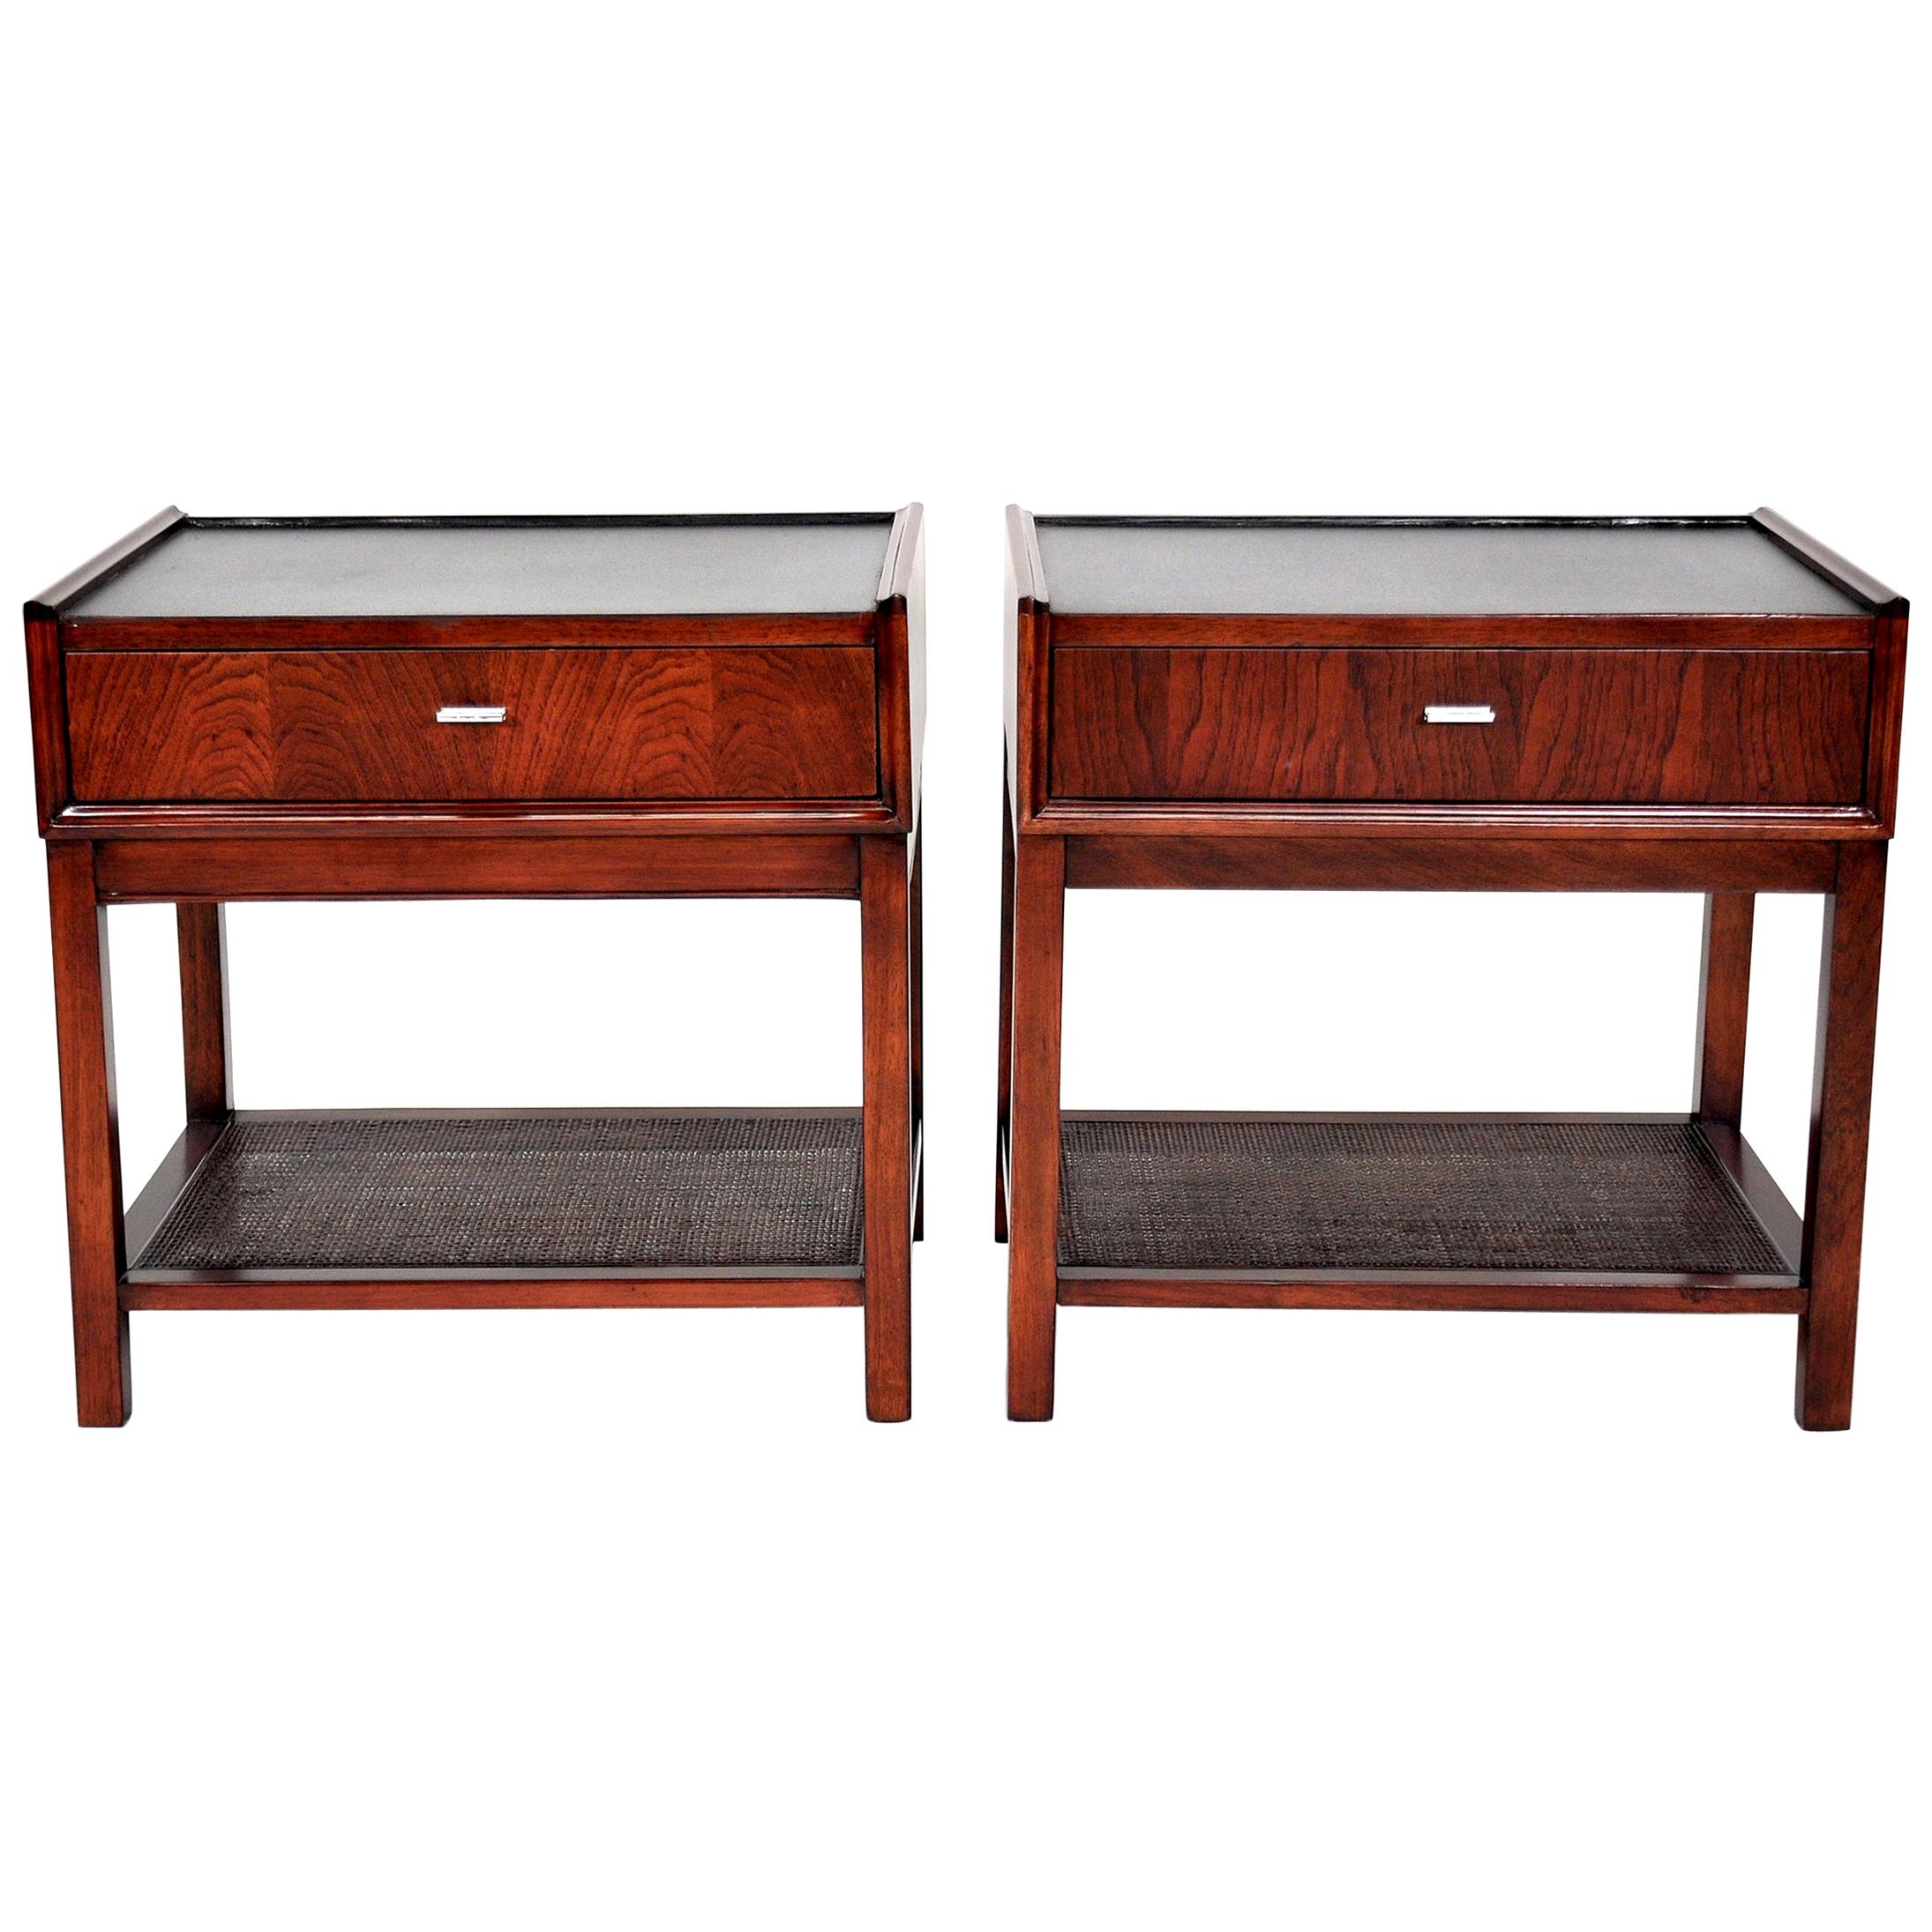 Pair of Rosewood, Cane and Black Leather Nightstands or Side Tables by Founders